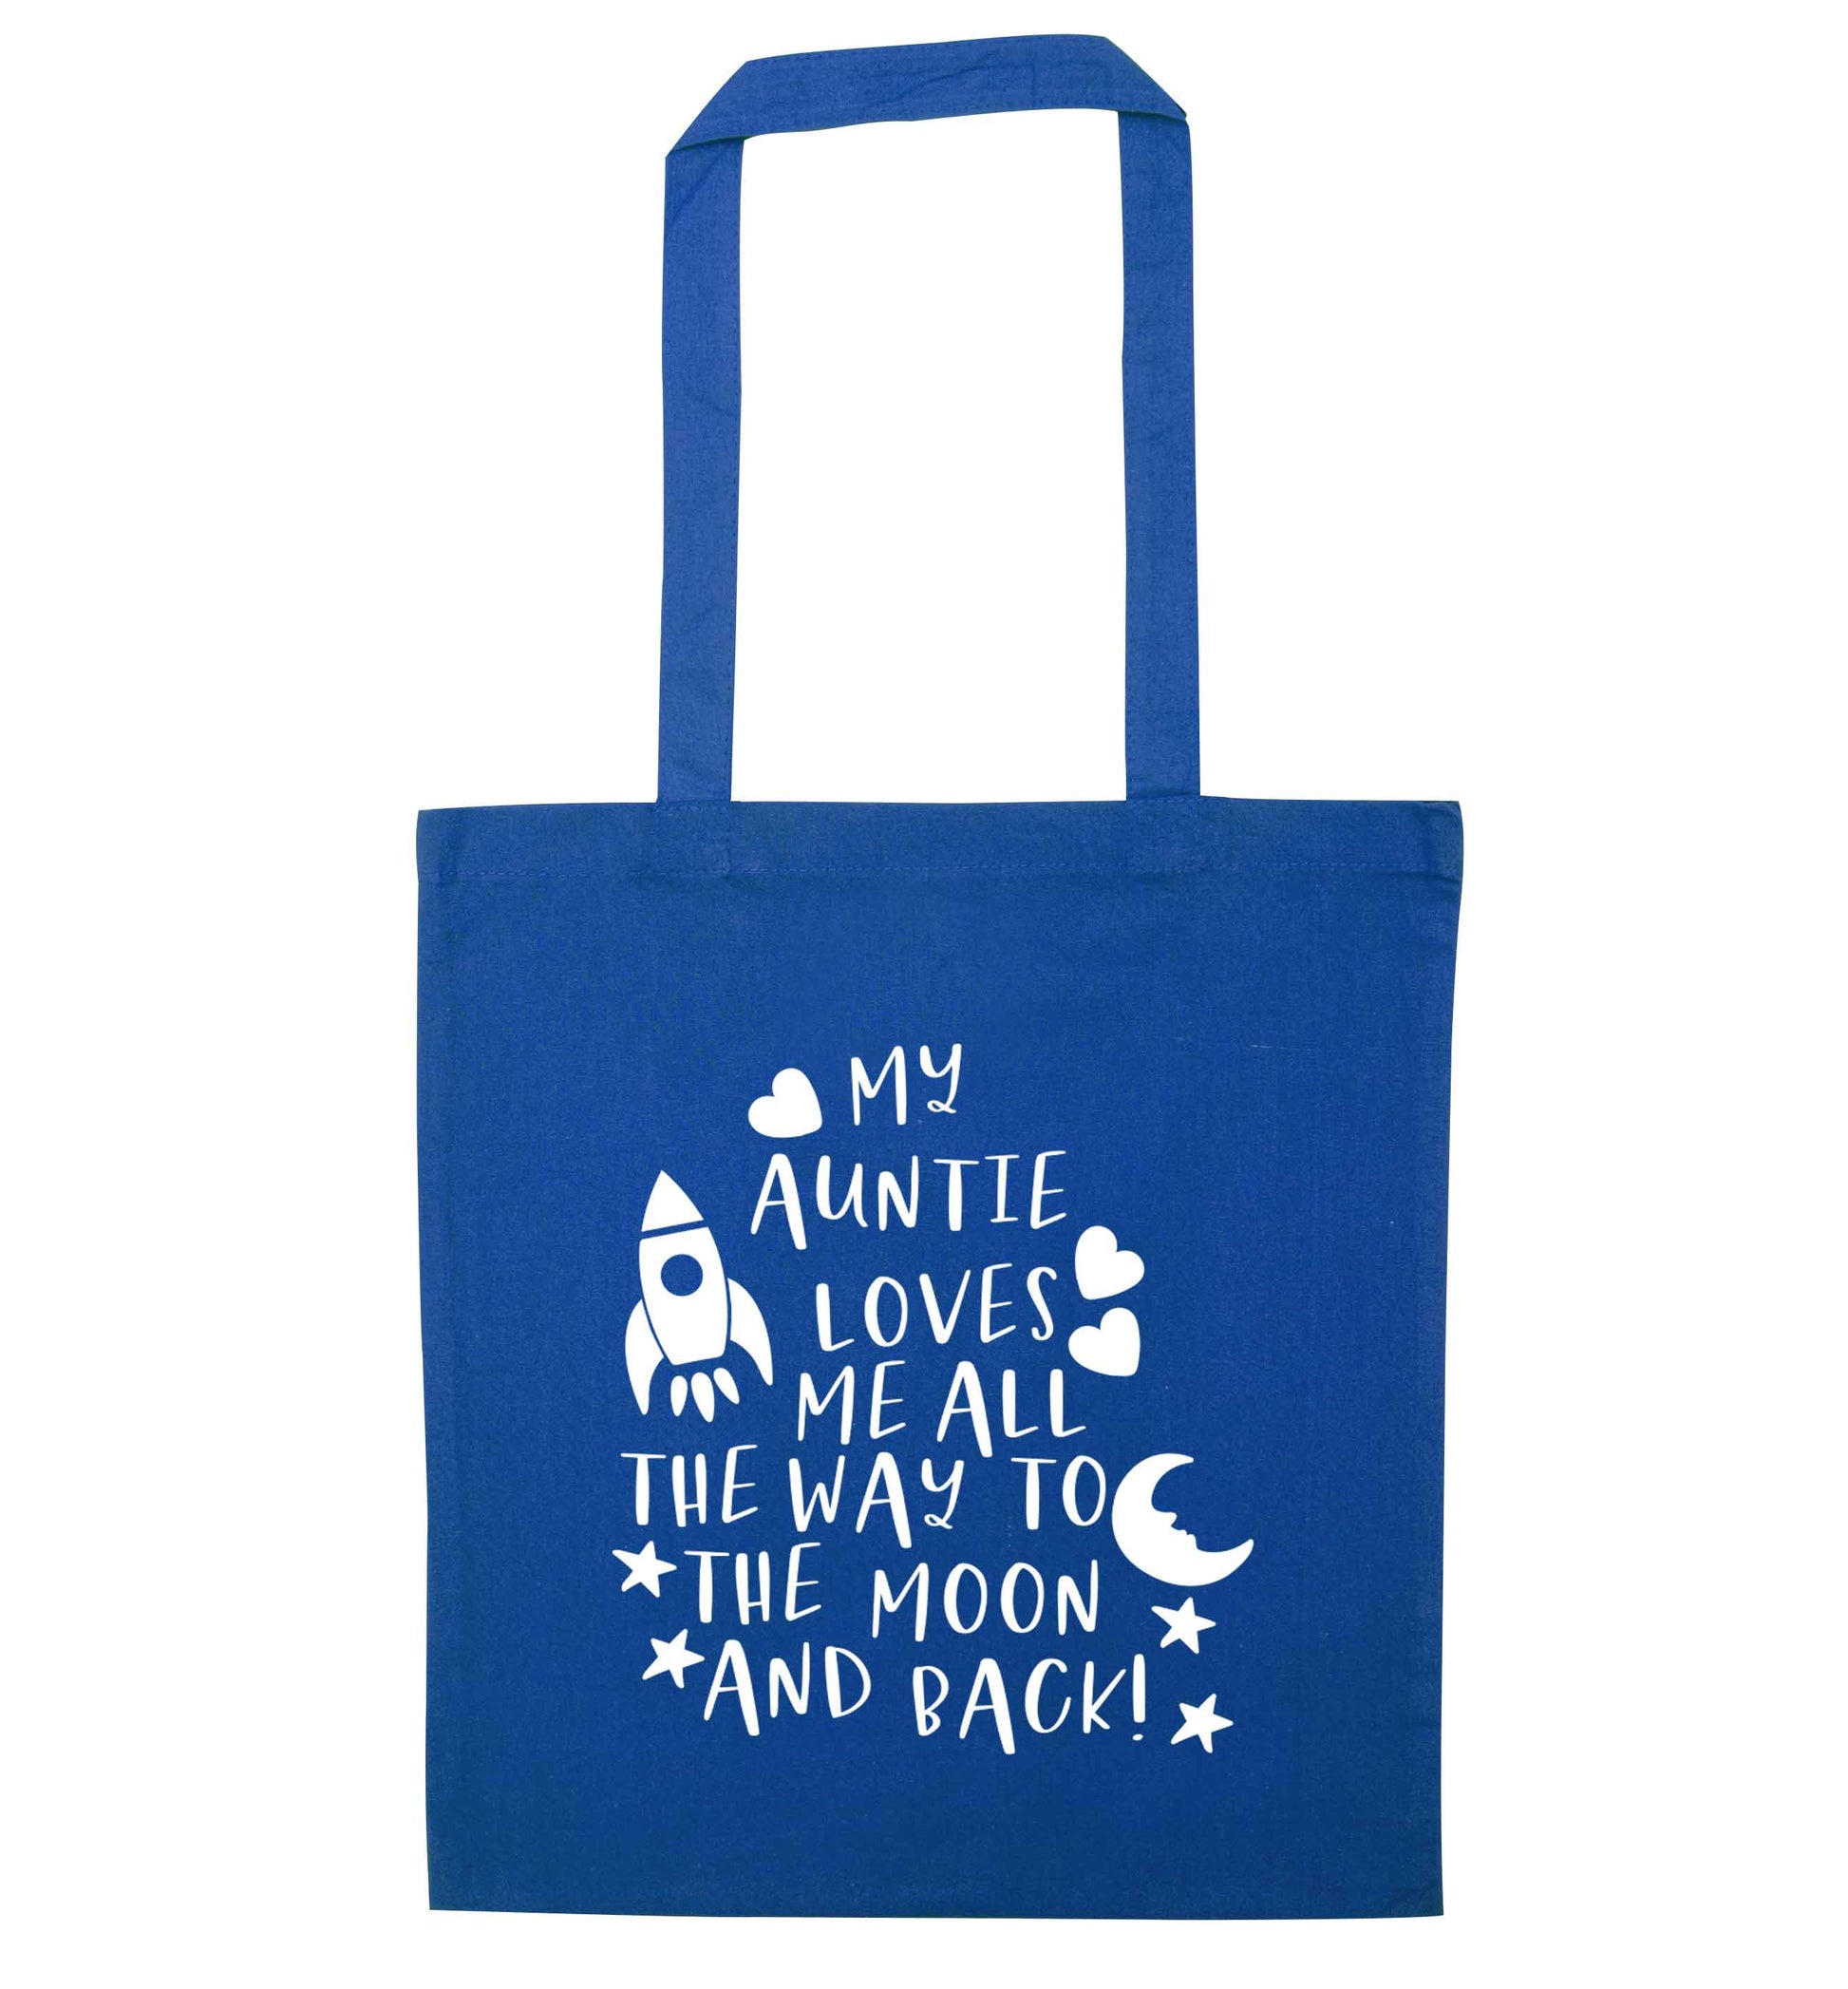 My auntie loves me all the way to the moon and back blue tote bag